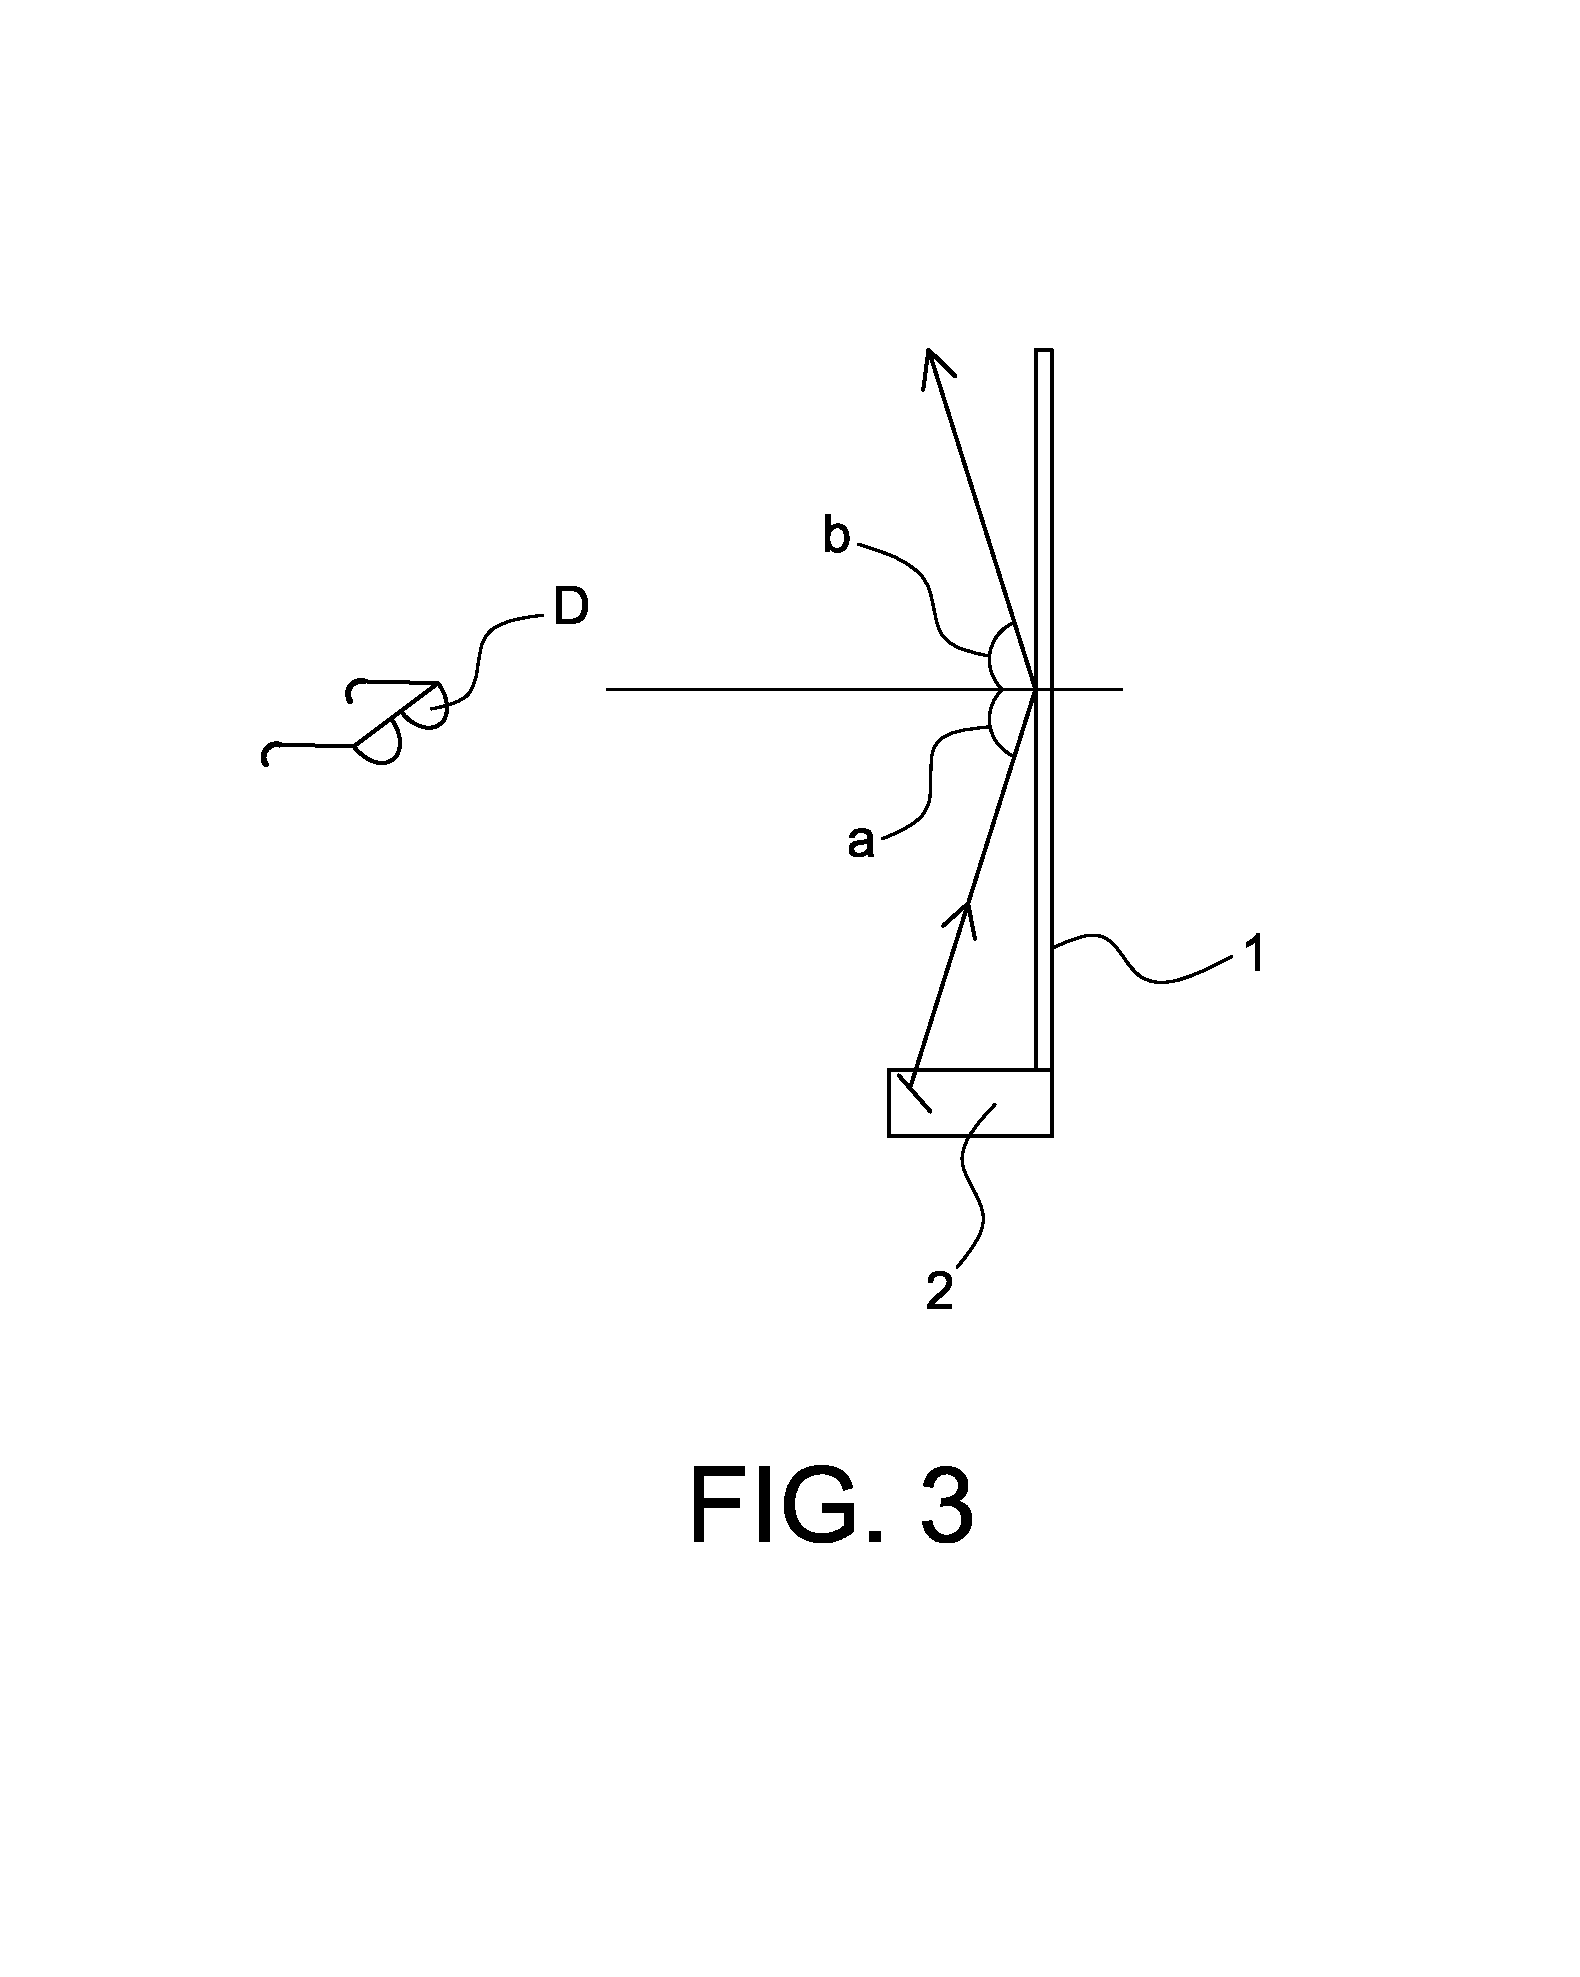 Reflective projection screen having multi-incedent angle